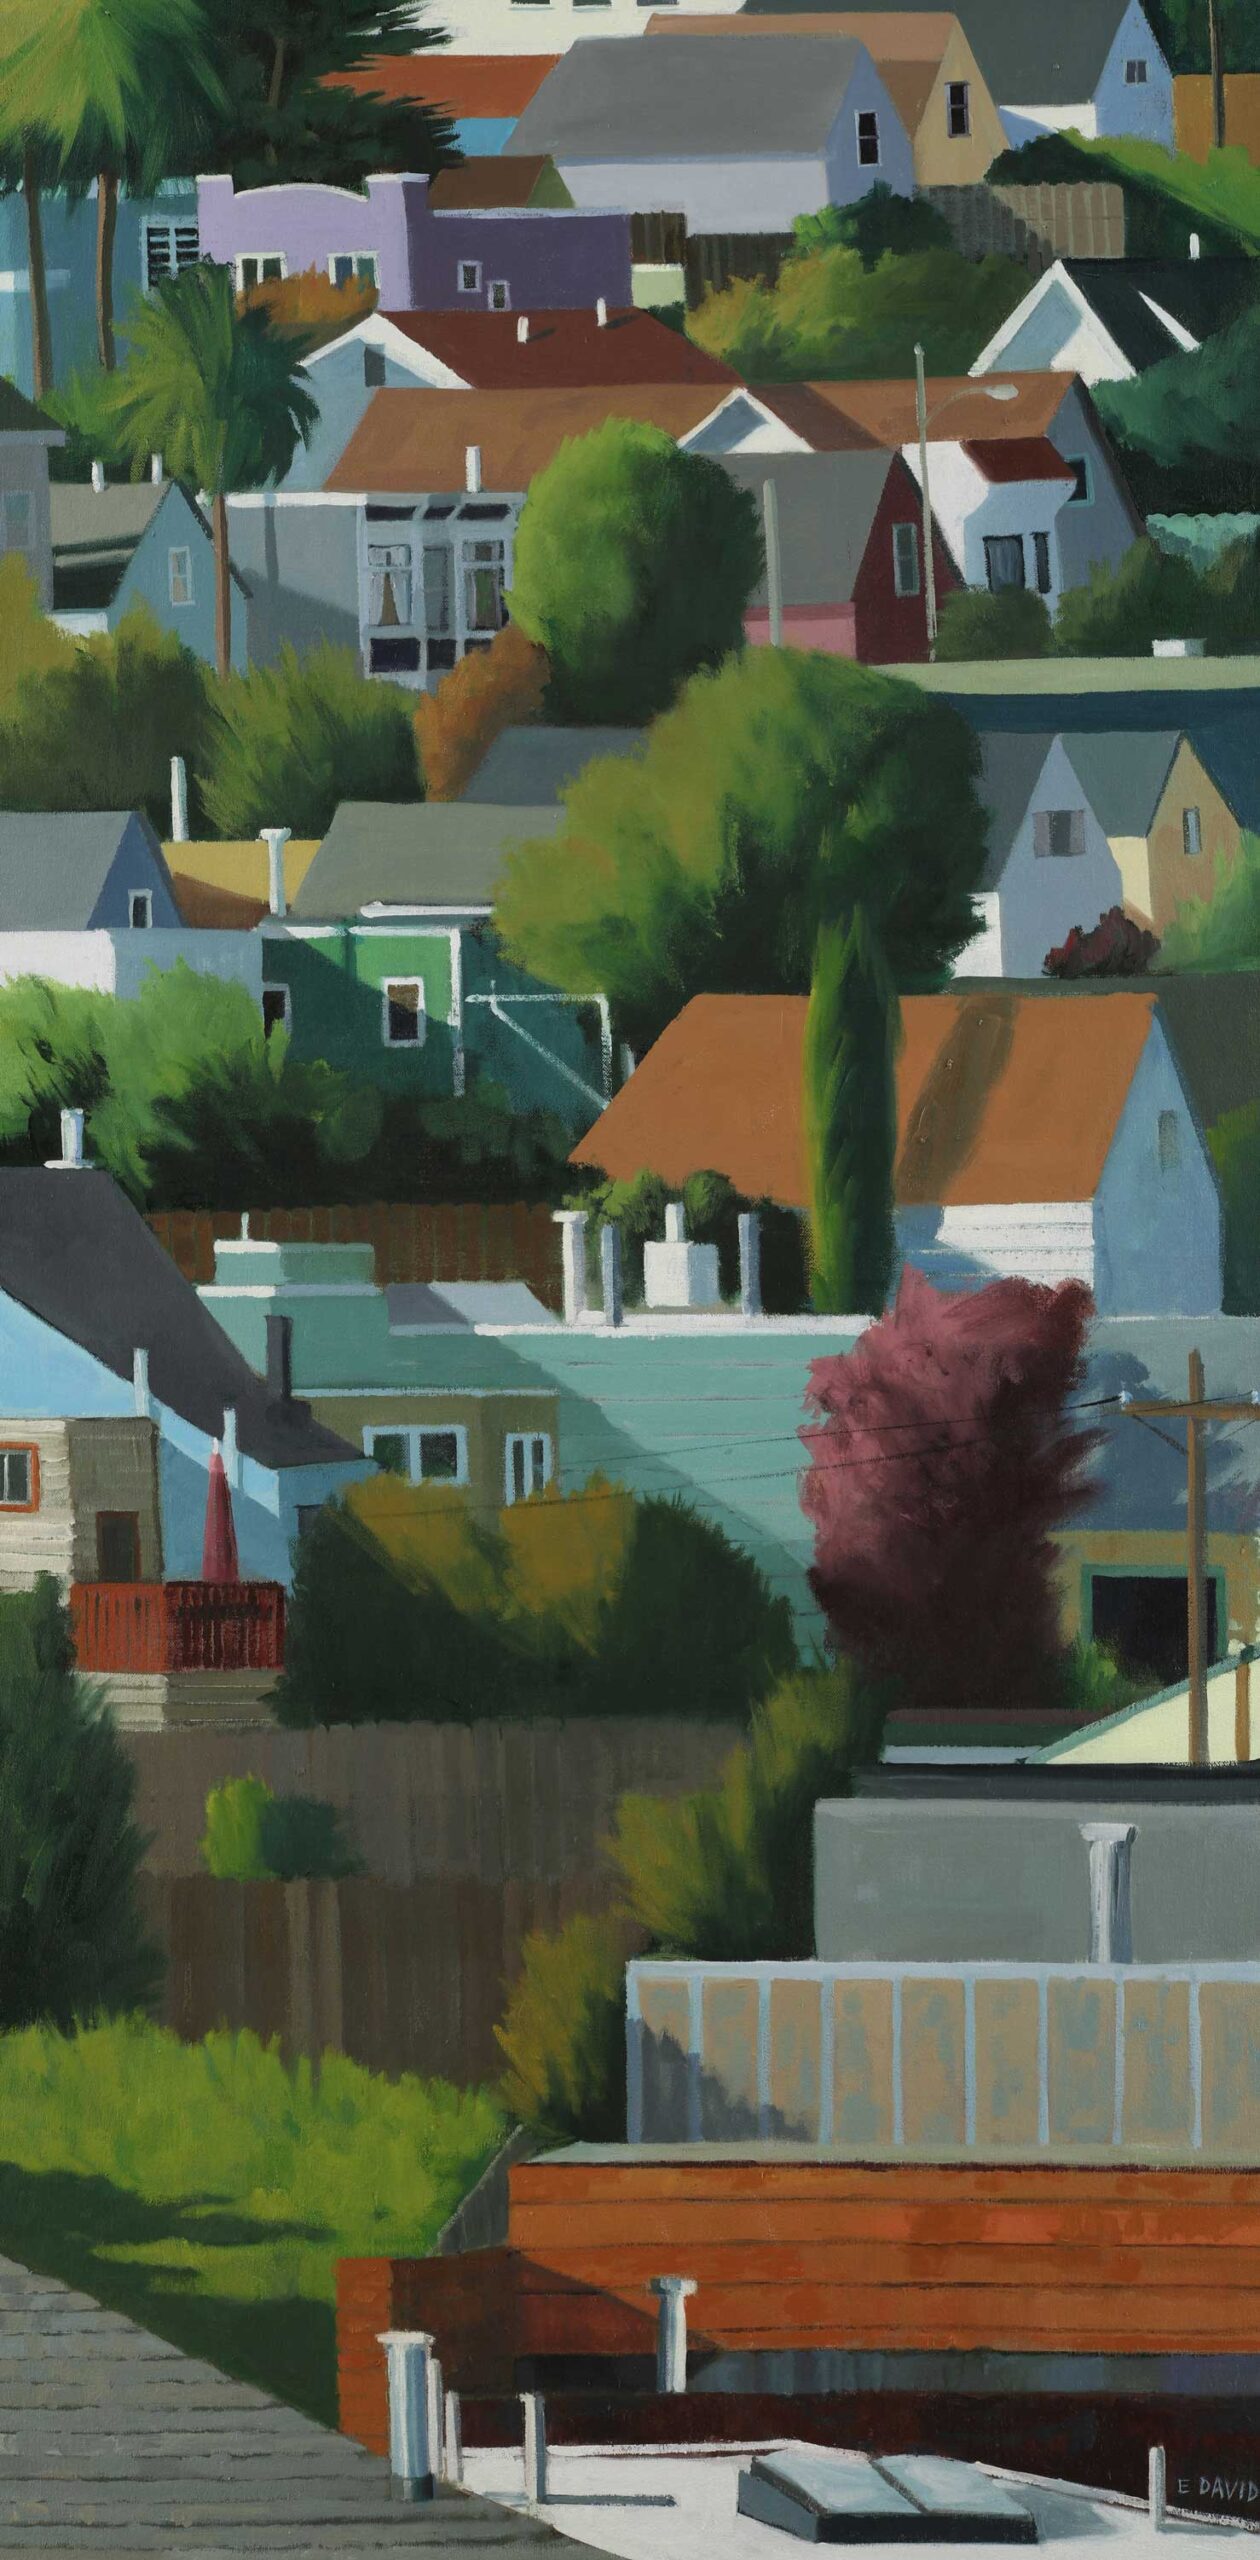 Eileen David, "Red Tree and Backyard Fences," 2023, oil on canvas, 48 x 24 in.